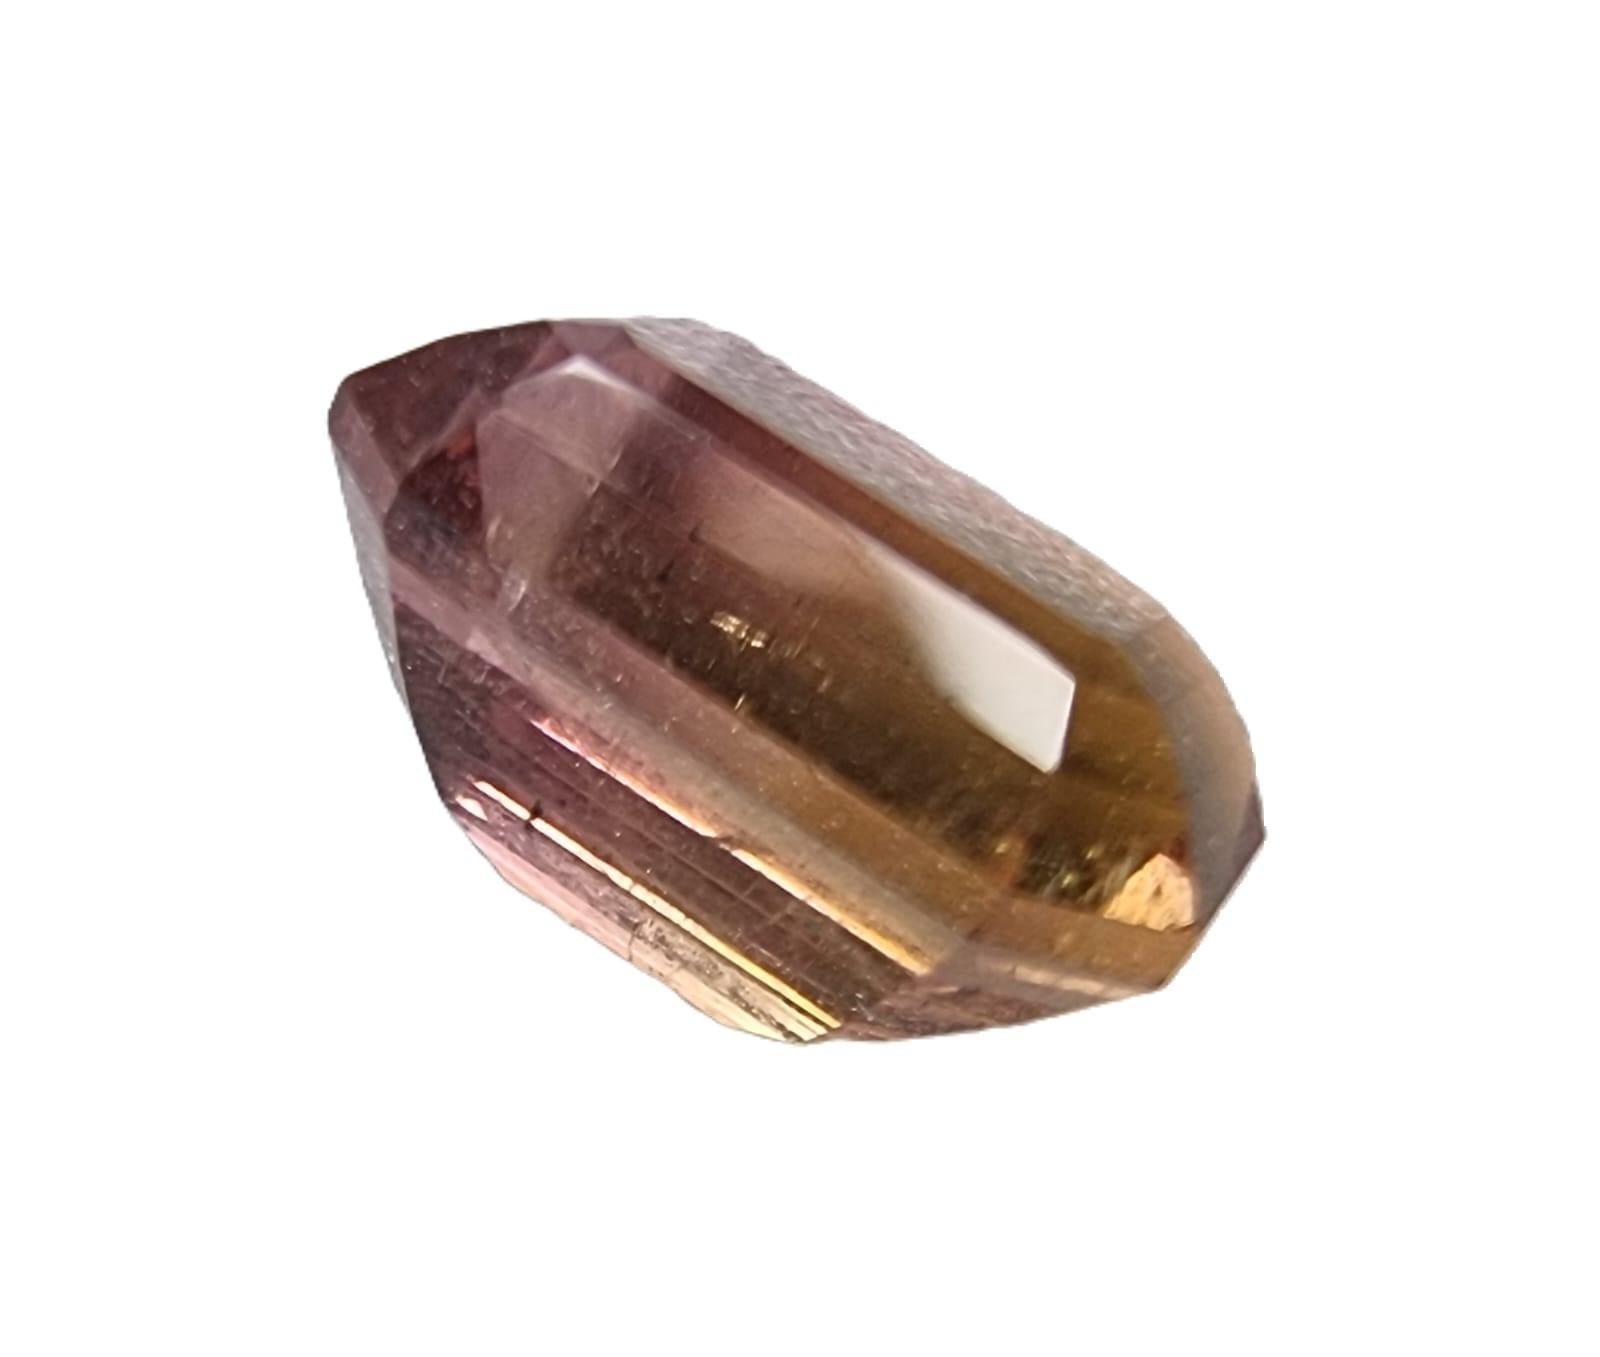 Watch your jewelry creation pop with this truly unique rich and captivating  2.3ct Emerald Cut Bi-color Brown and Pink Rubellite Loose Gemstone. 

Gemstone Details:
Carat Weight: 2.3 carats
Shape: Emerald Cut
Variety: Bi-Color Brownish Pink